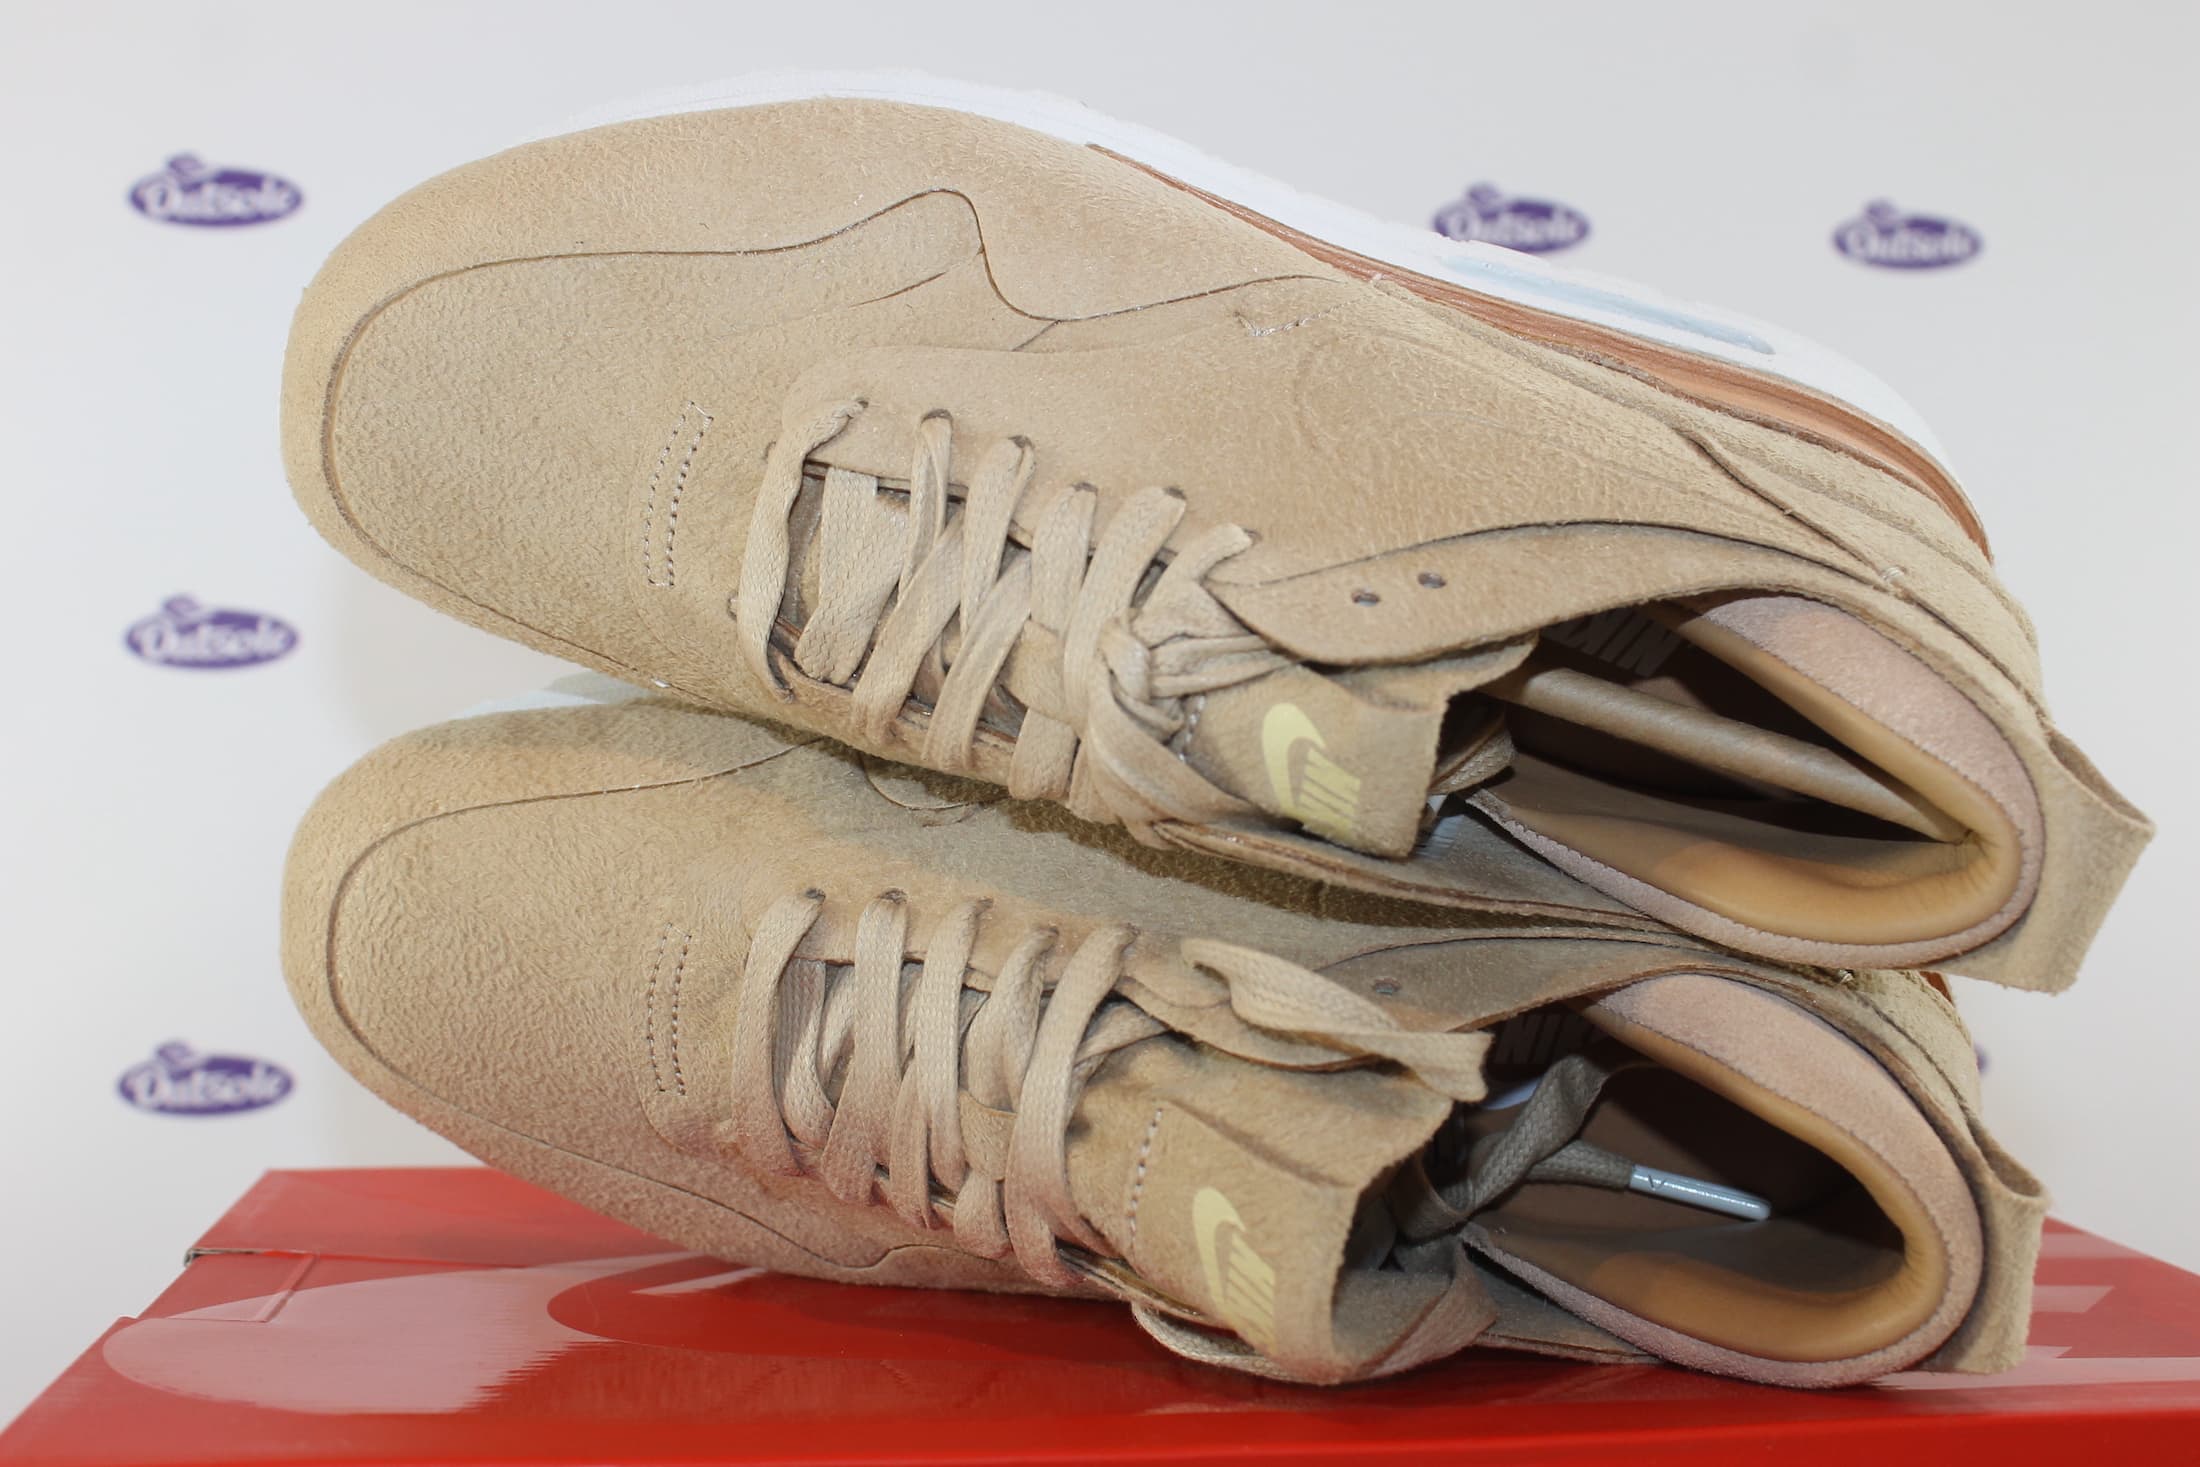 effectief God Tochi boom Nike Air Max 1 NikeLab Royal Linen • ✓ In stock at Outsole